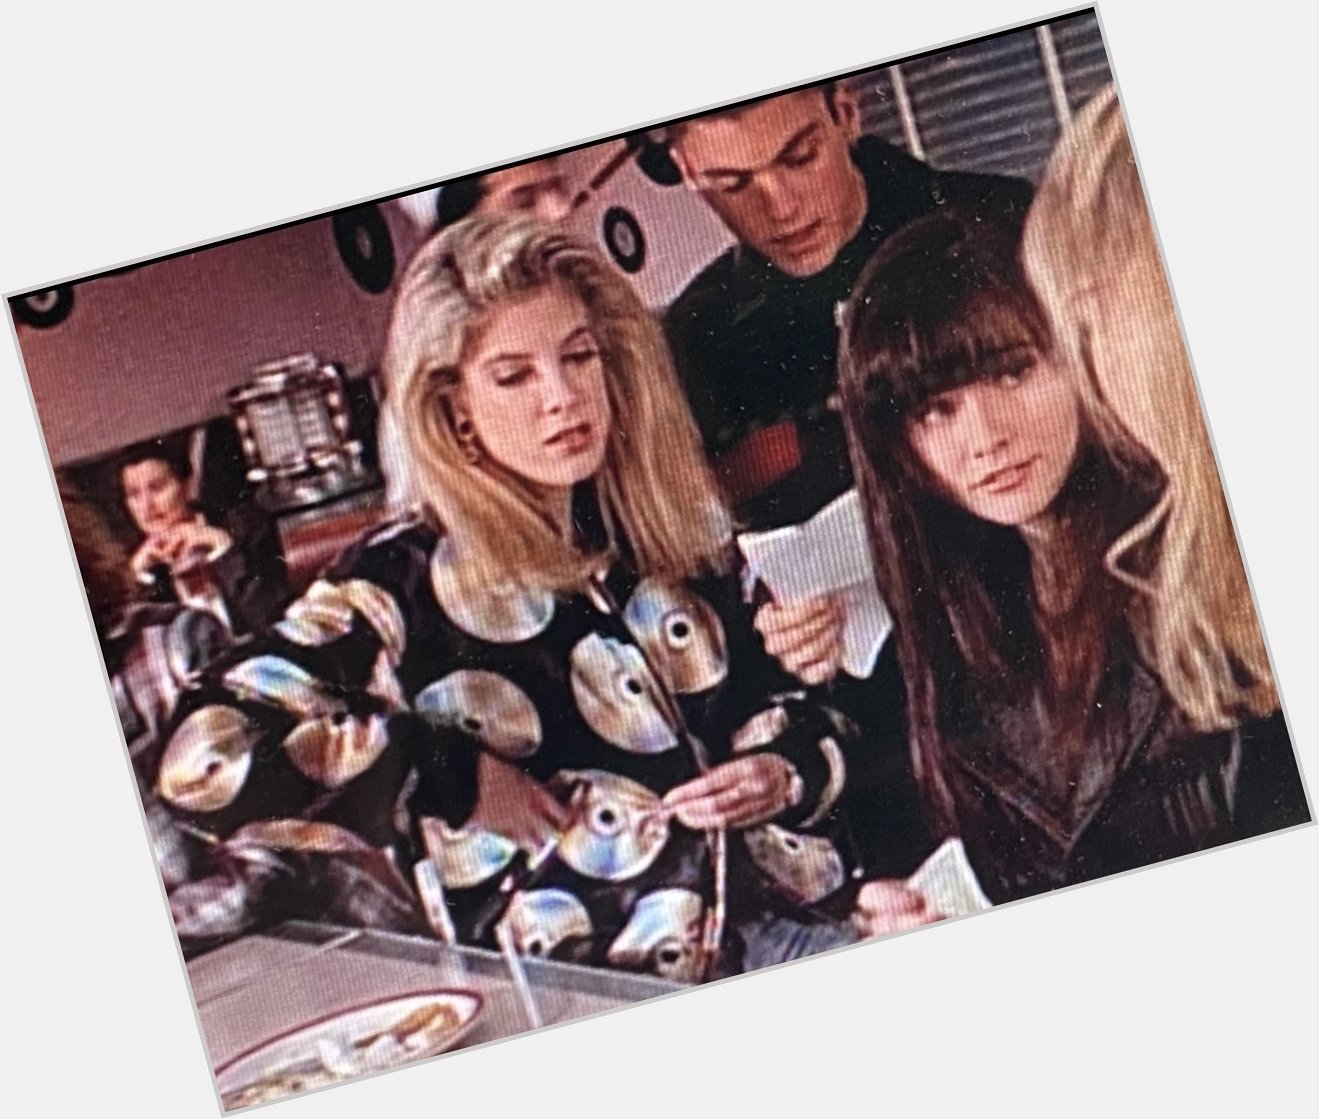 Happy Birthday, Tori Spelling!
(Cool jacket, by the way) 